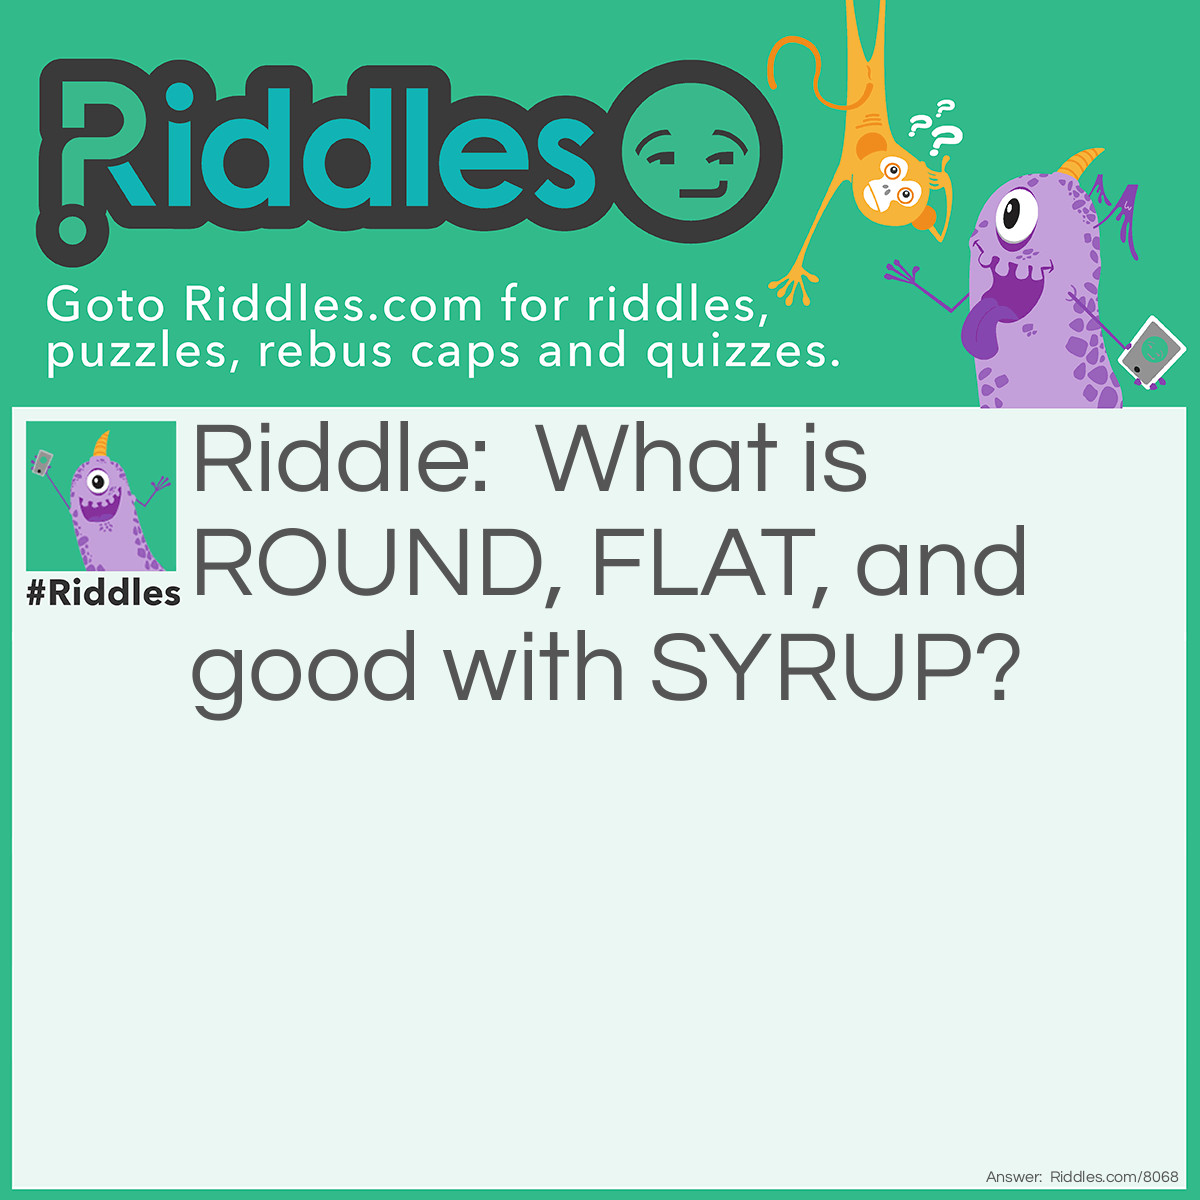 Riddle: What is ROUND, FLAT, and good with SYRUP? Answer: A round flat syrup container.